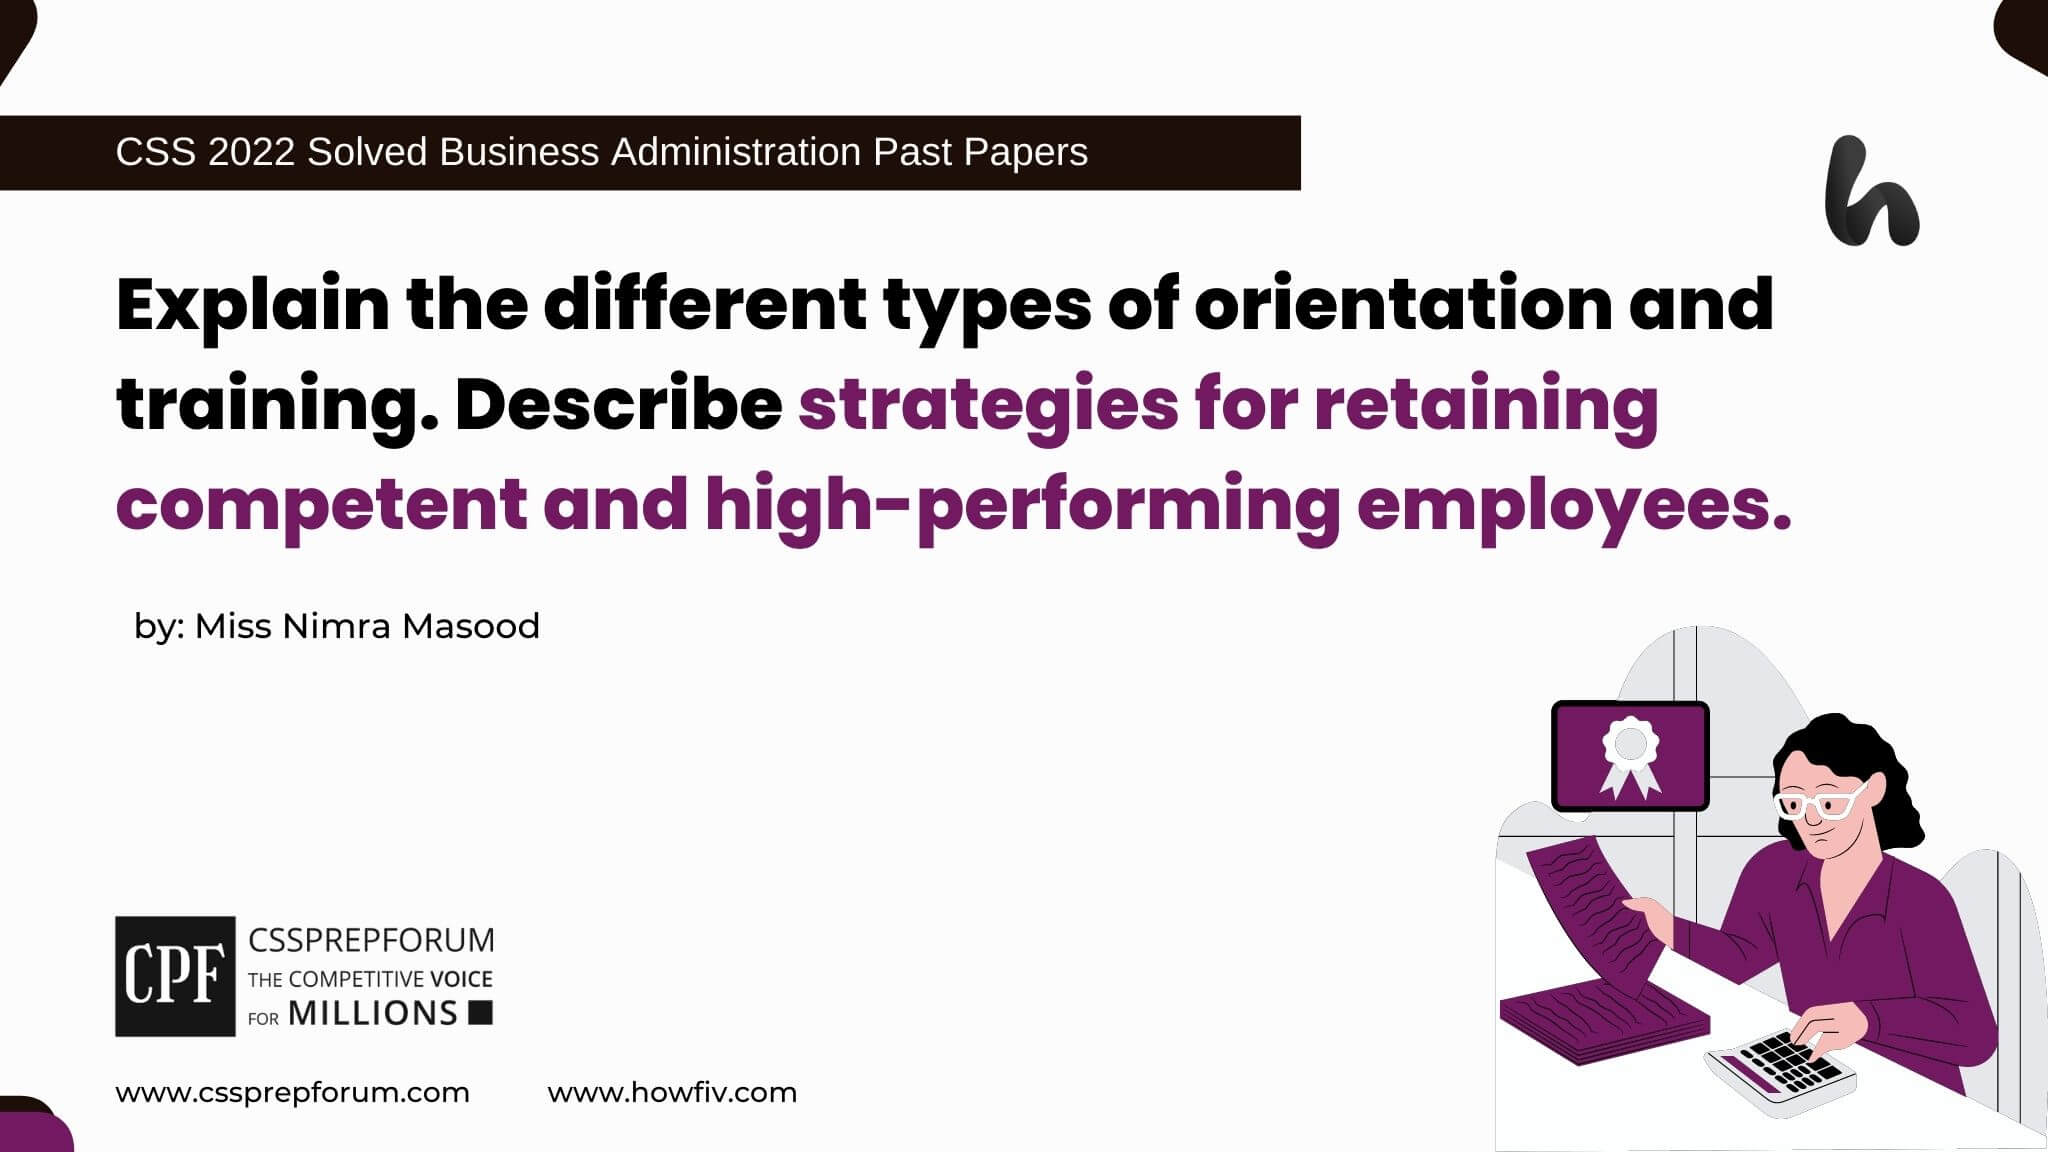 explain-the-different-types-of-orientation-and-training-describe-strategies-for-retaining-competent-and-high-performing-employees